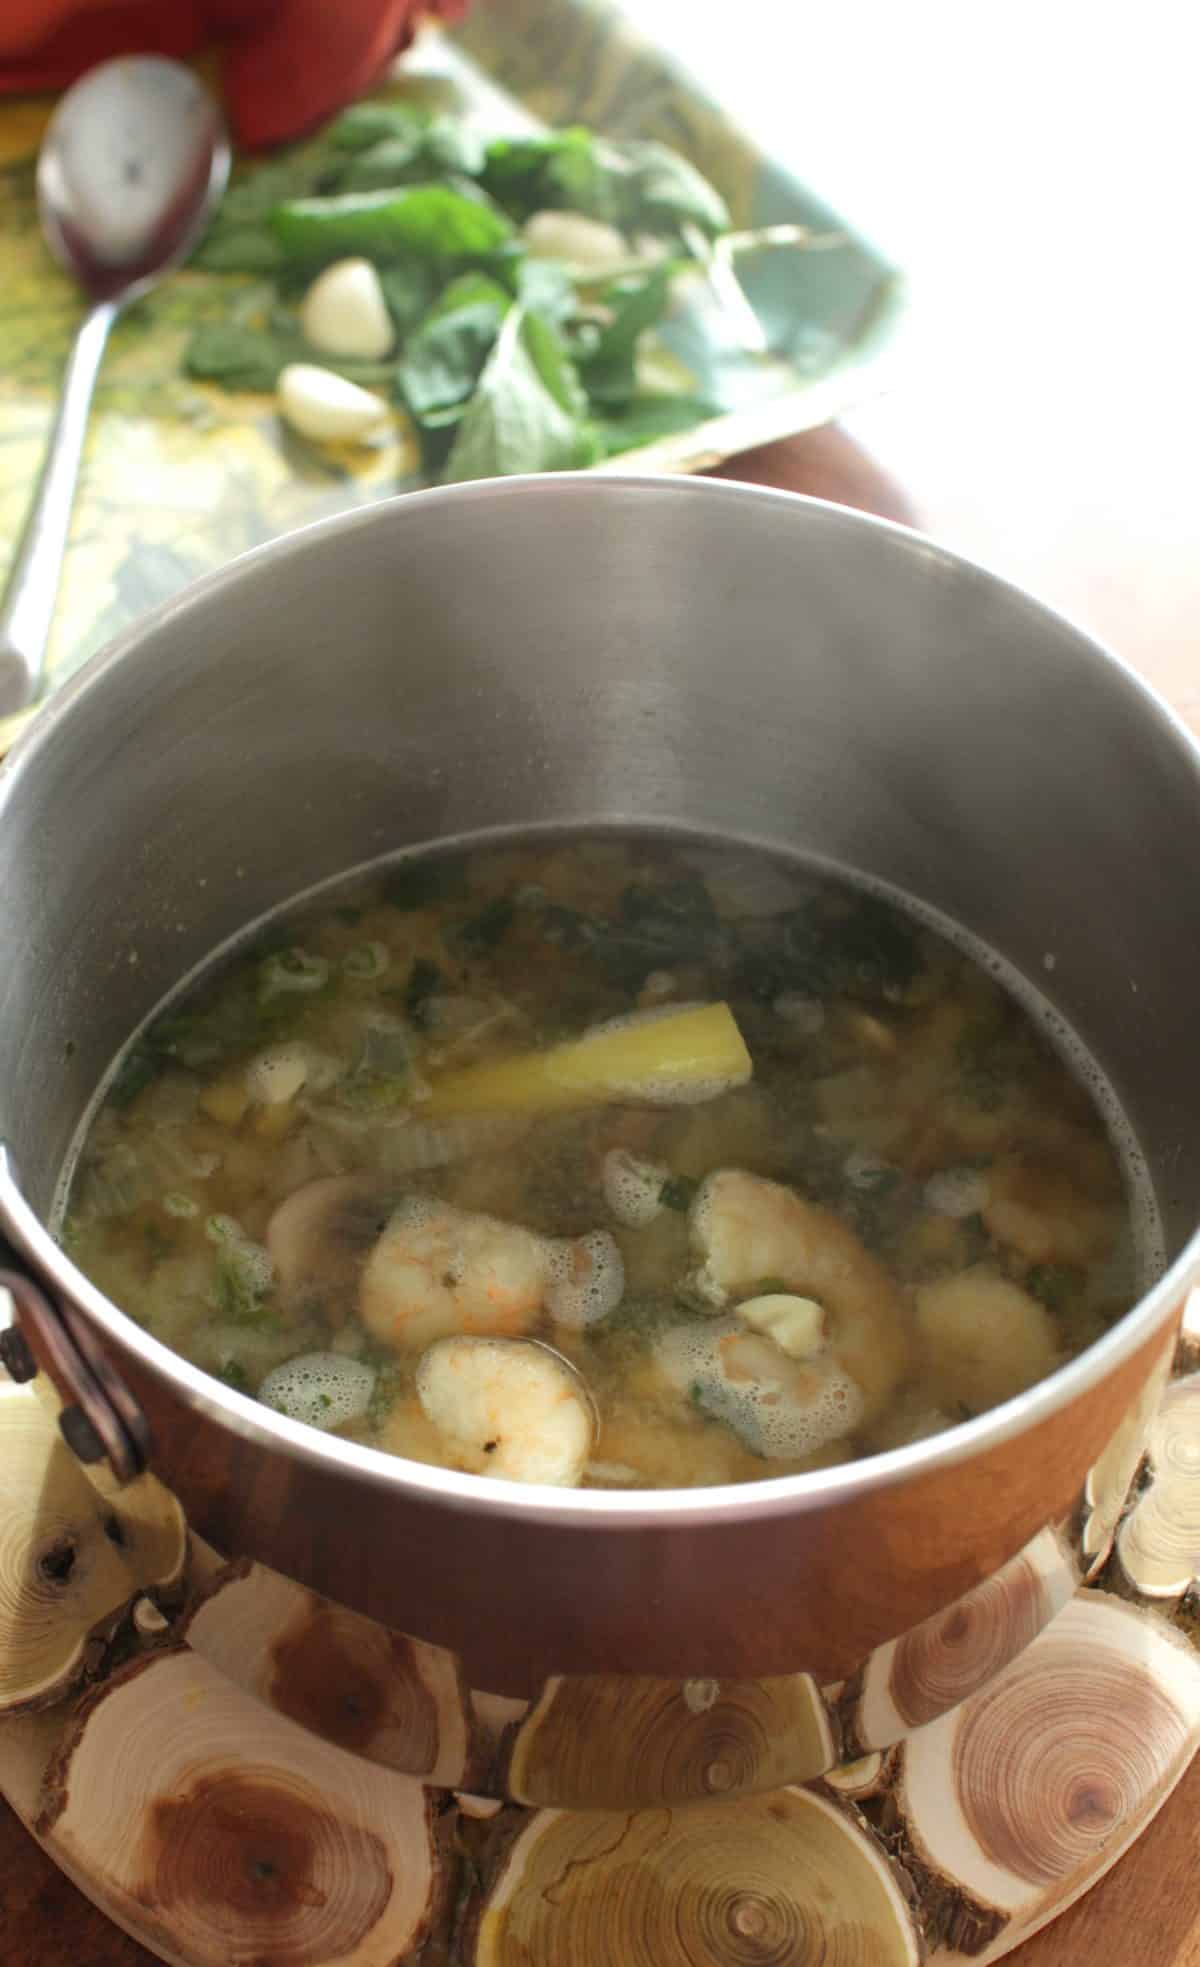 a pot filled with soup on a wooden table.